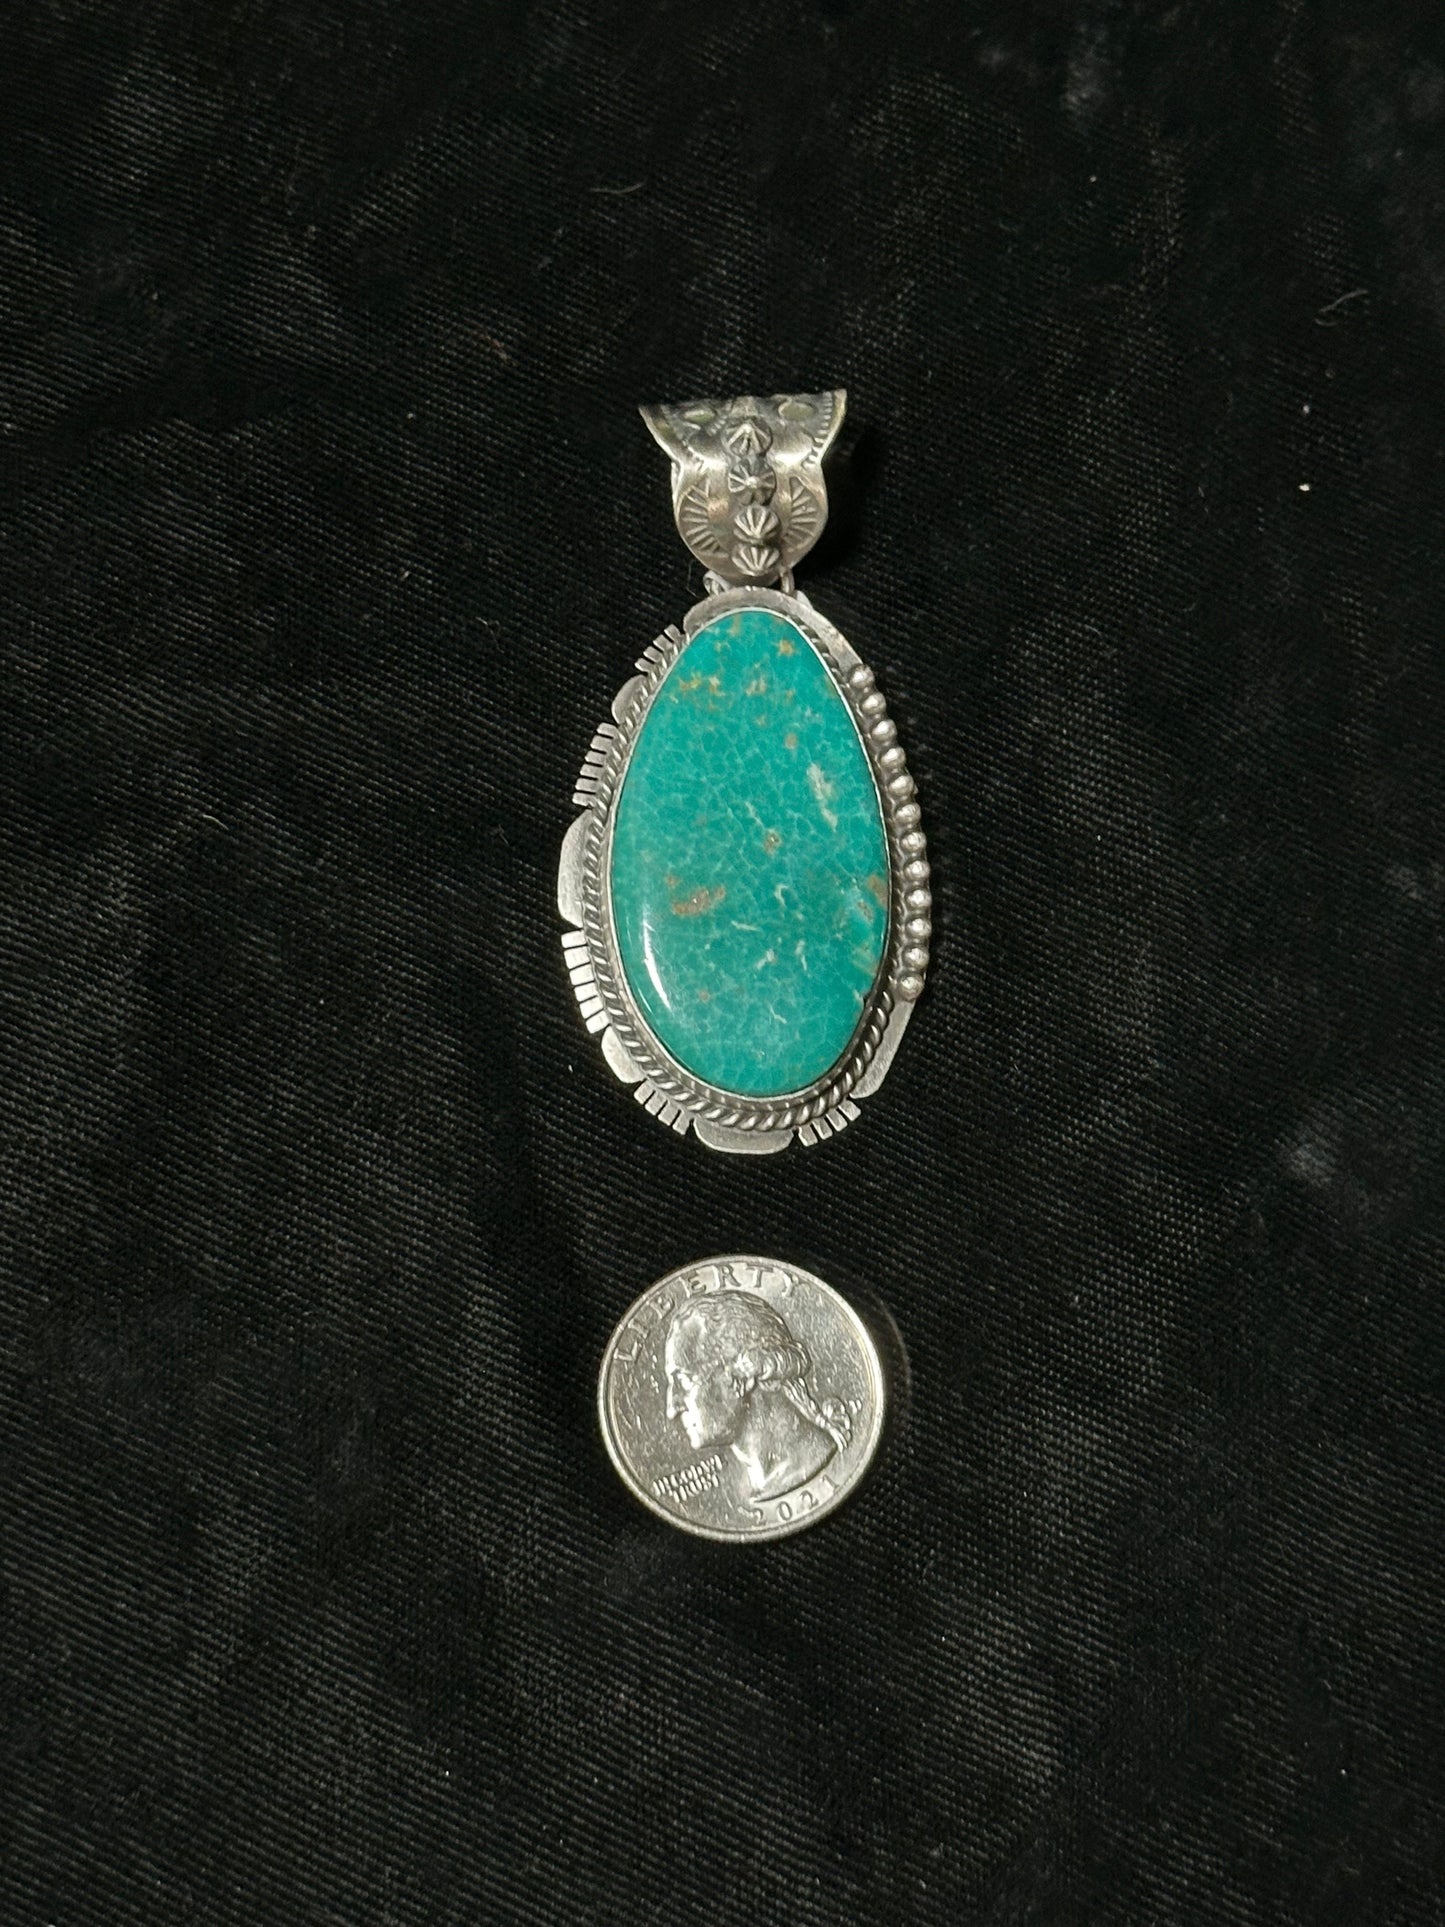 Emerald Valley Turquoise Pendant with 11mm Bale by John Nelson, Navajo